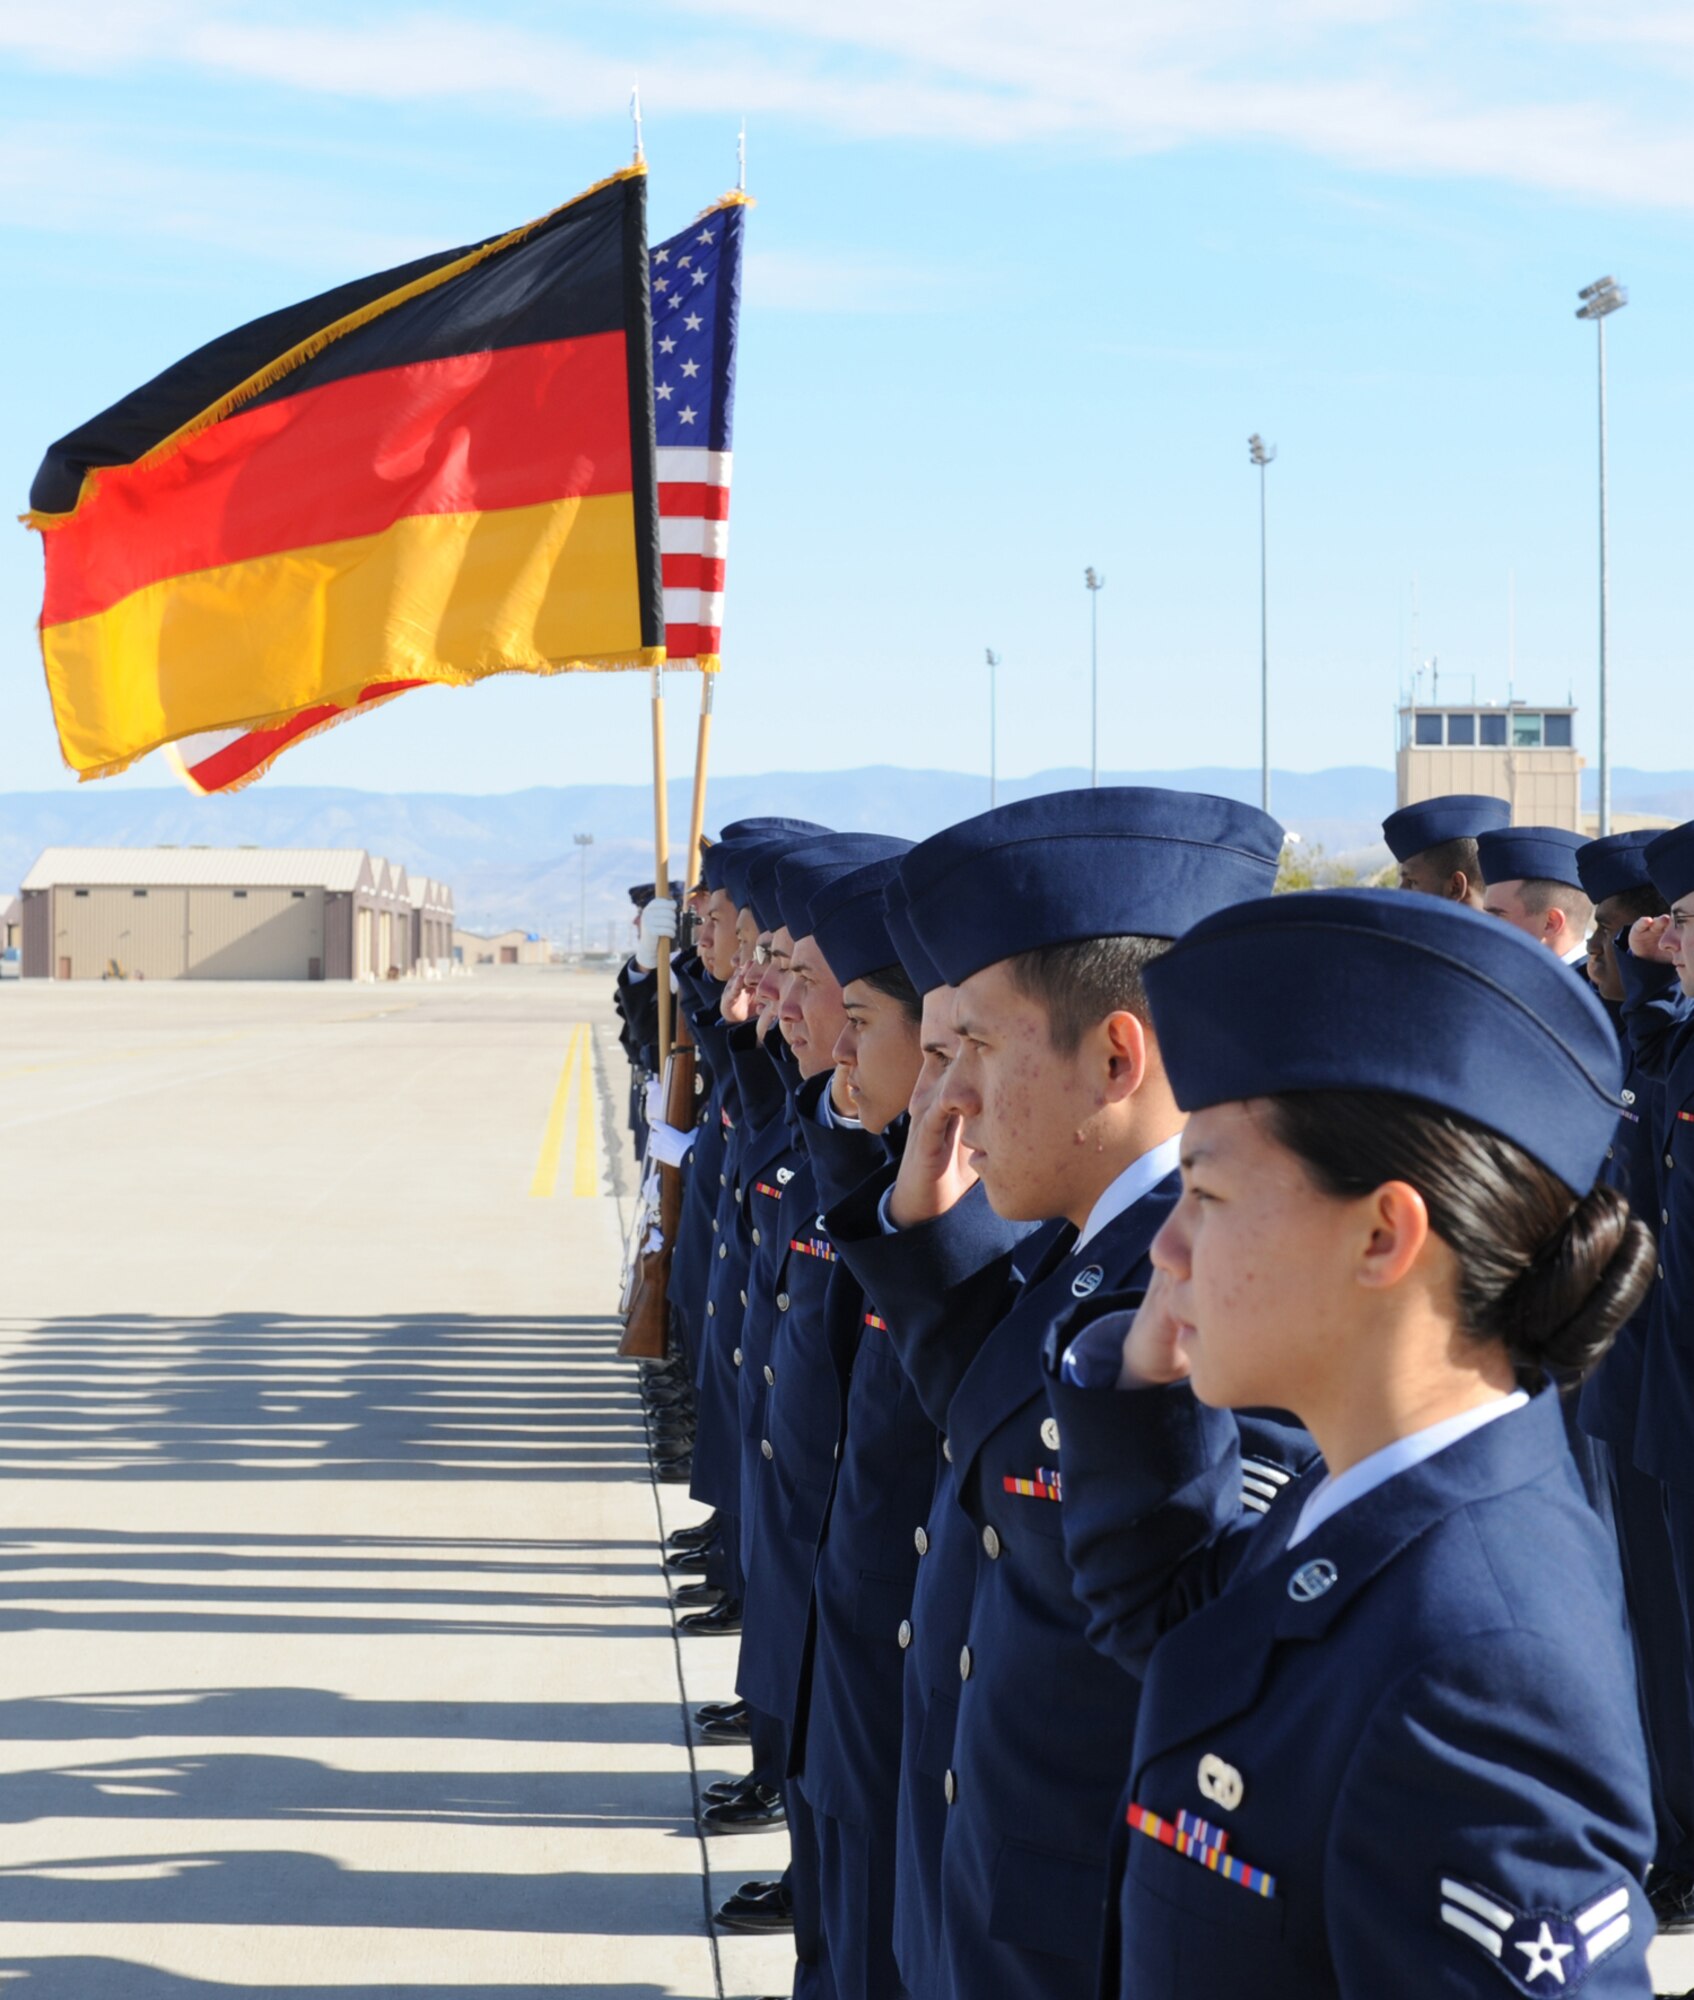 Airmen from the 49th Fighter Wing and the German Air Force Flying Training Center, salute during the arrival of Minister Franz Josef Jung, German Minister of Defense, at Holloman Air Force Base, N.M., Nov. 24. Minister Jung came to visit Holloman to see the German Air Force Flying Training Center. The German air force has been training its aircrews throughout the United States since 1958 before it was moved to Holloman in 1992. (U.S. Air Force photo/Airman 1st Class Michael Means)